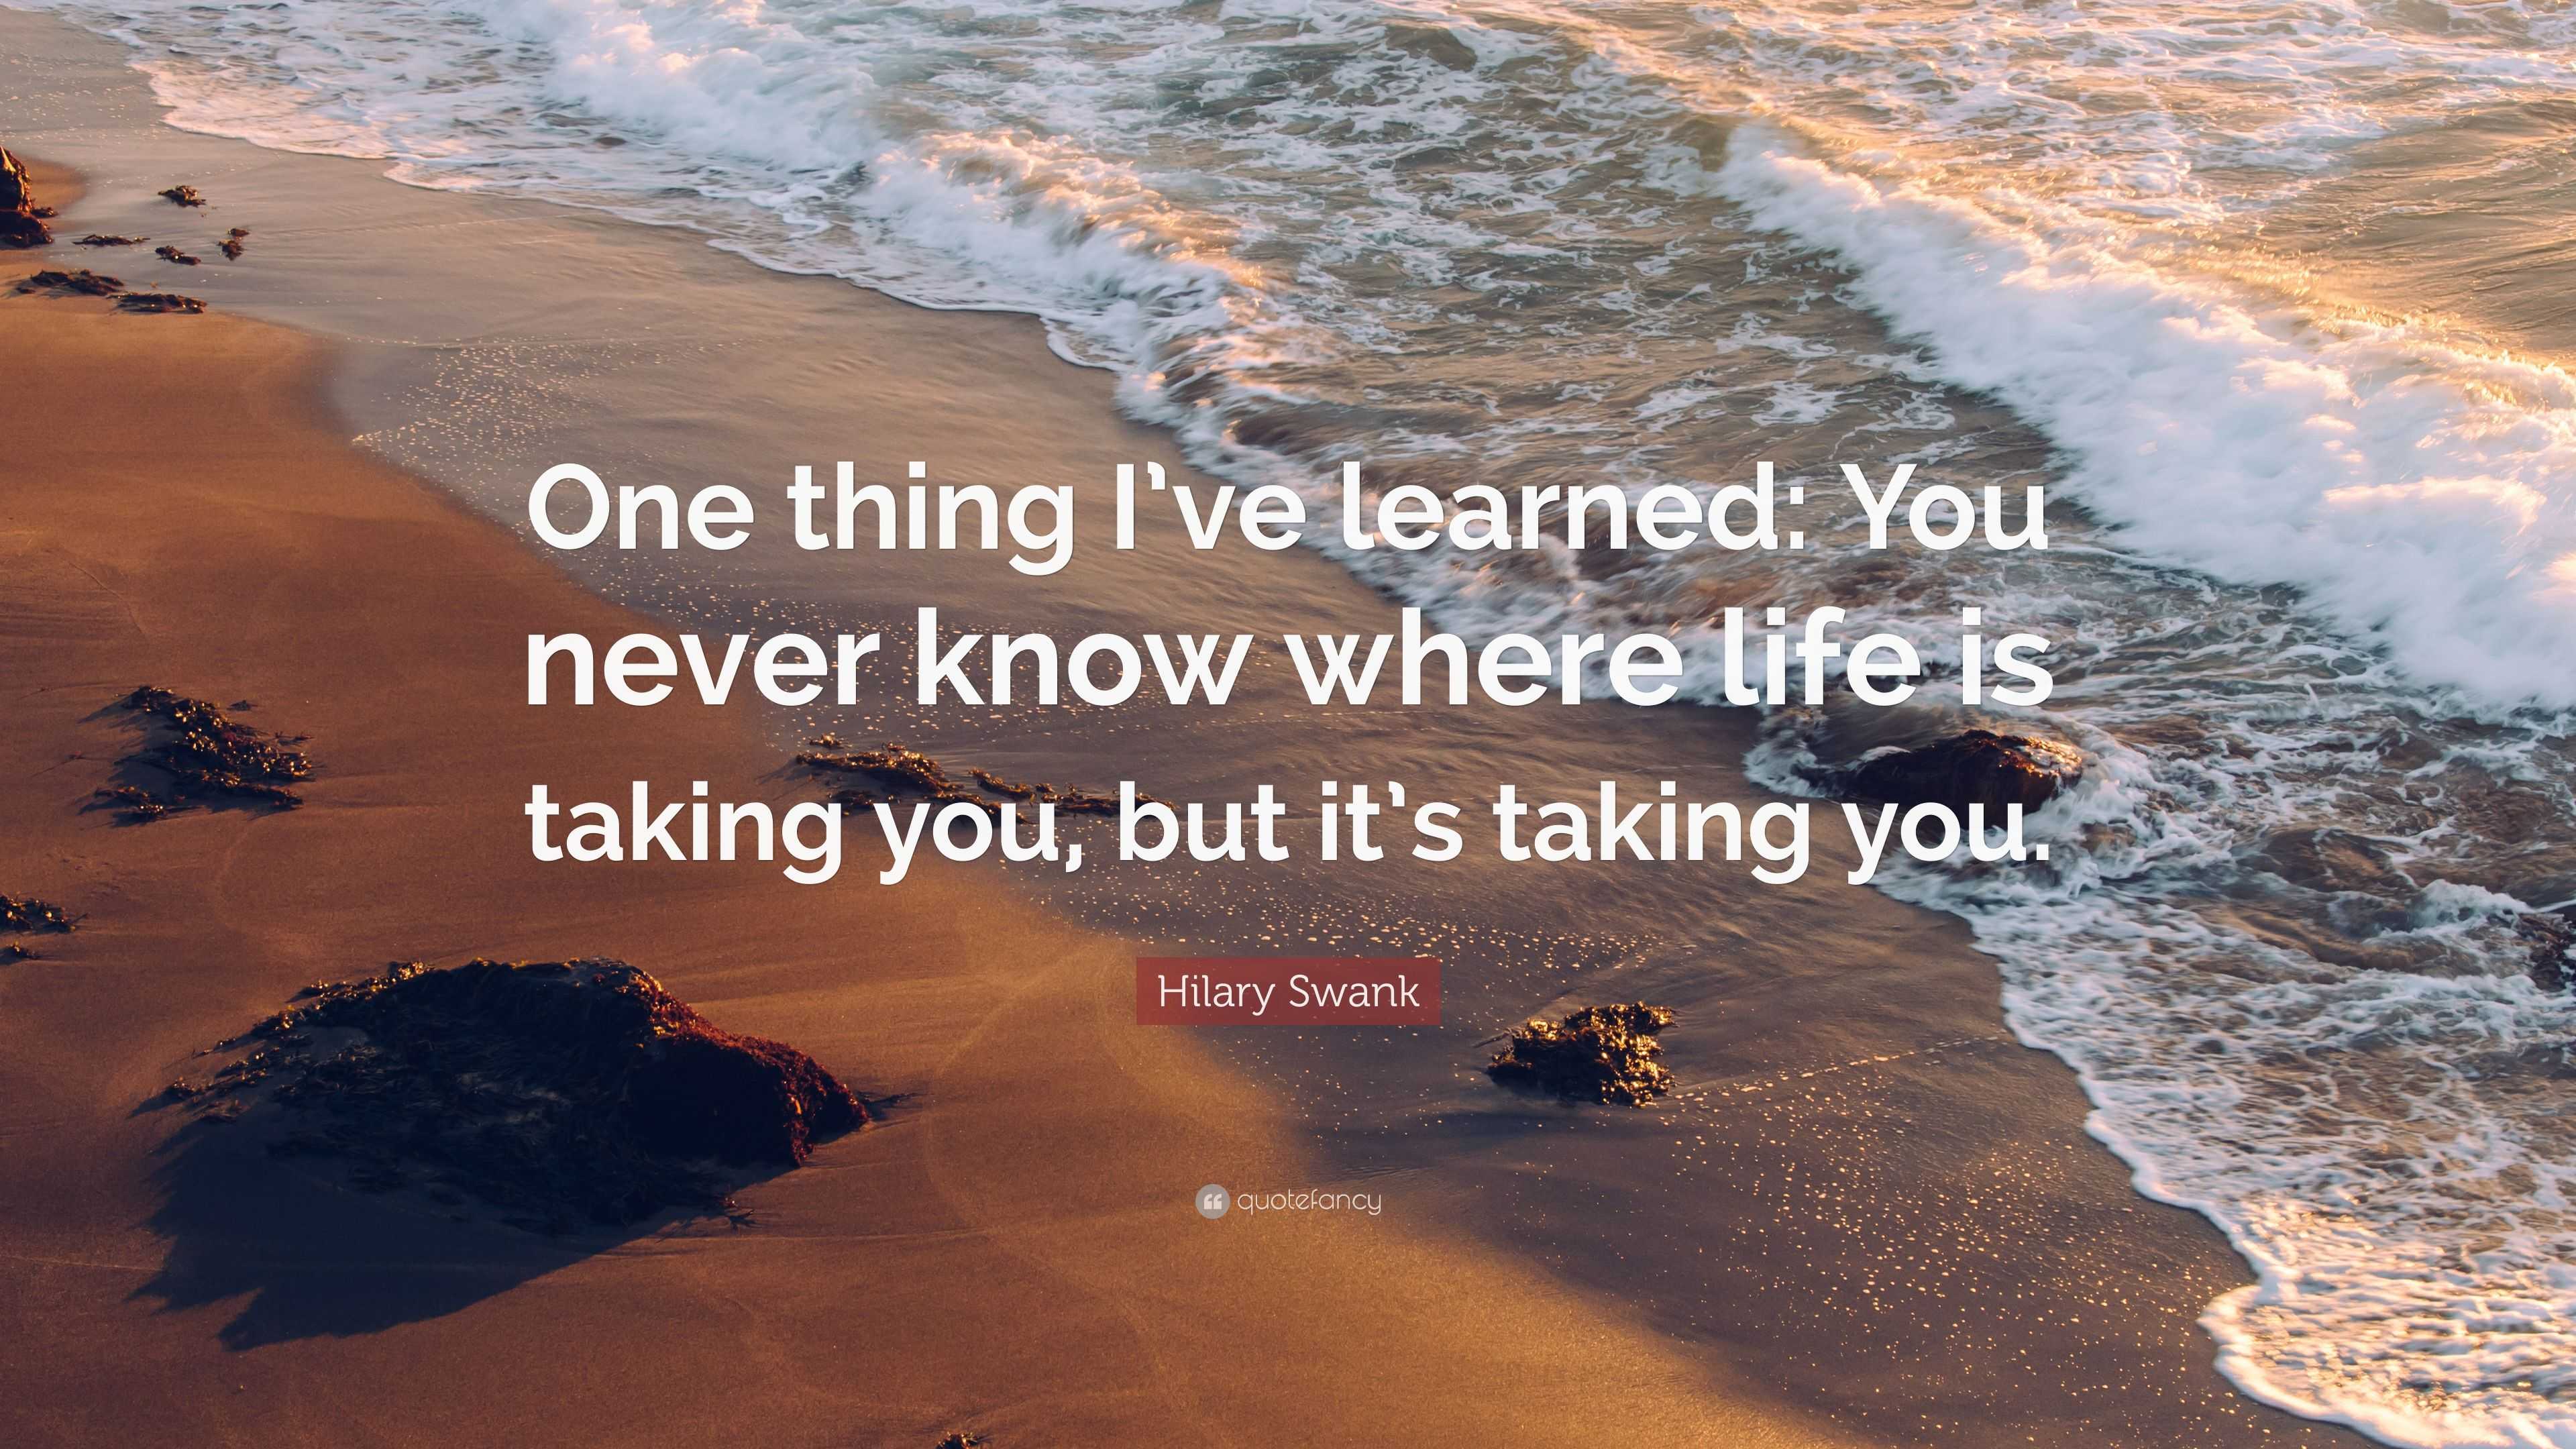 Hilary Swank Quote: “One thing I’ve learned: You never know where life ...